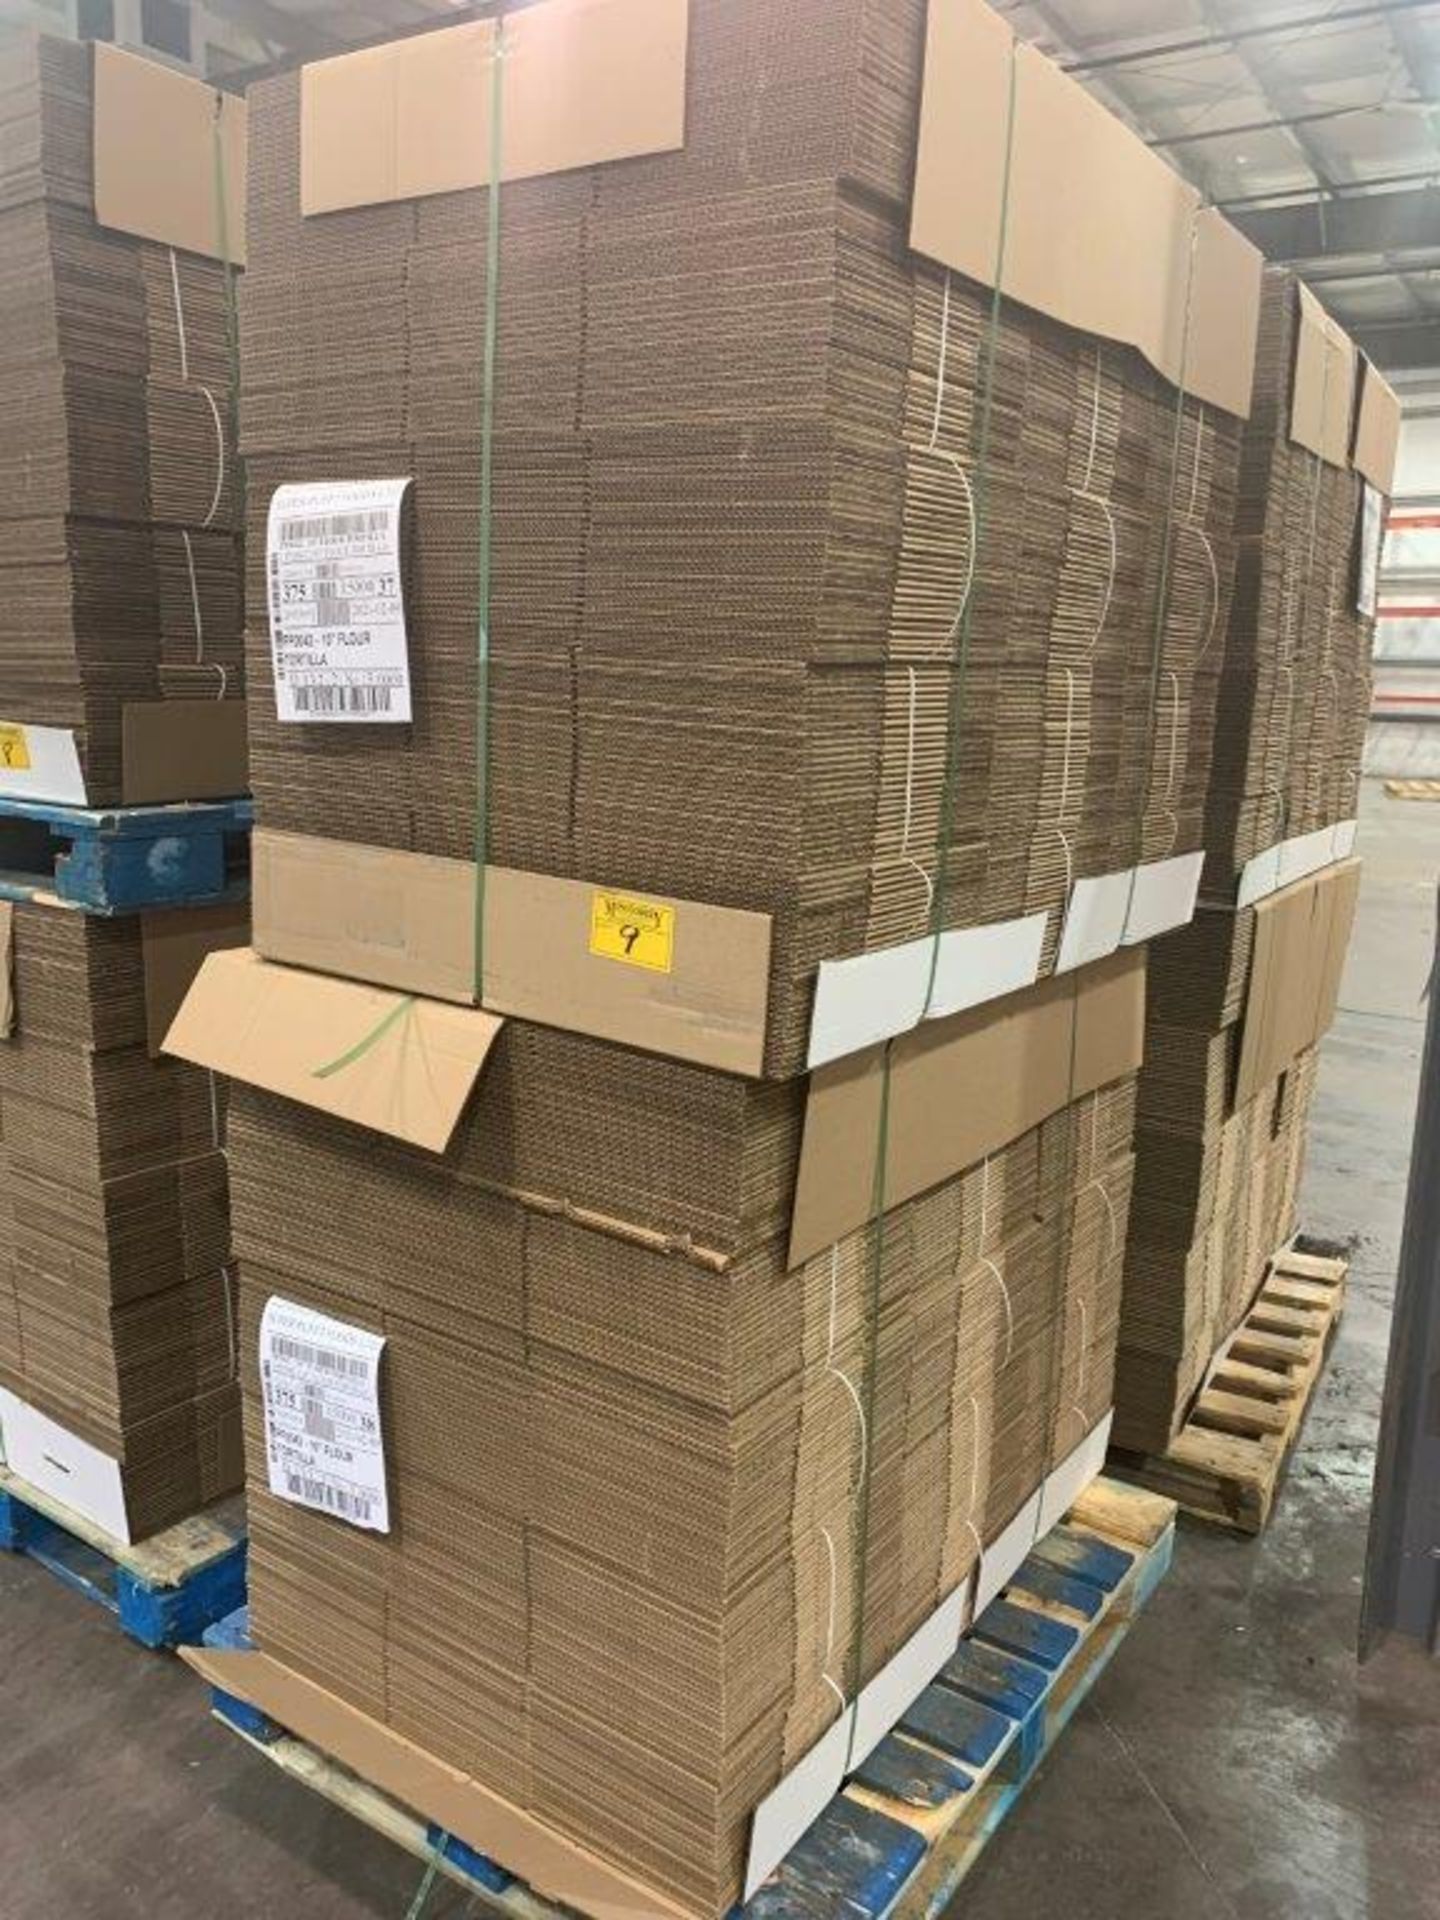 2 PALLETS PF0042 CORRIGATED CARDBOARD BOXES 375X2 - 750 BOXES APPROX 20X11X5 1/2 INCHES